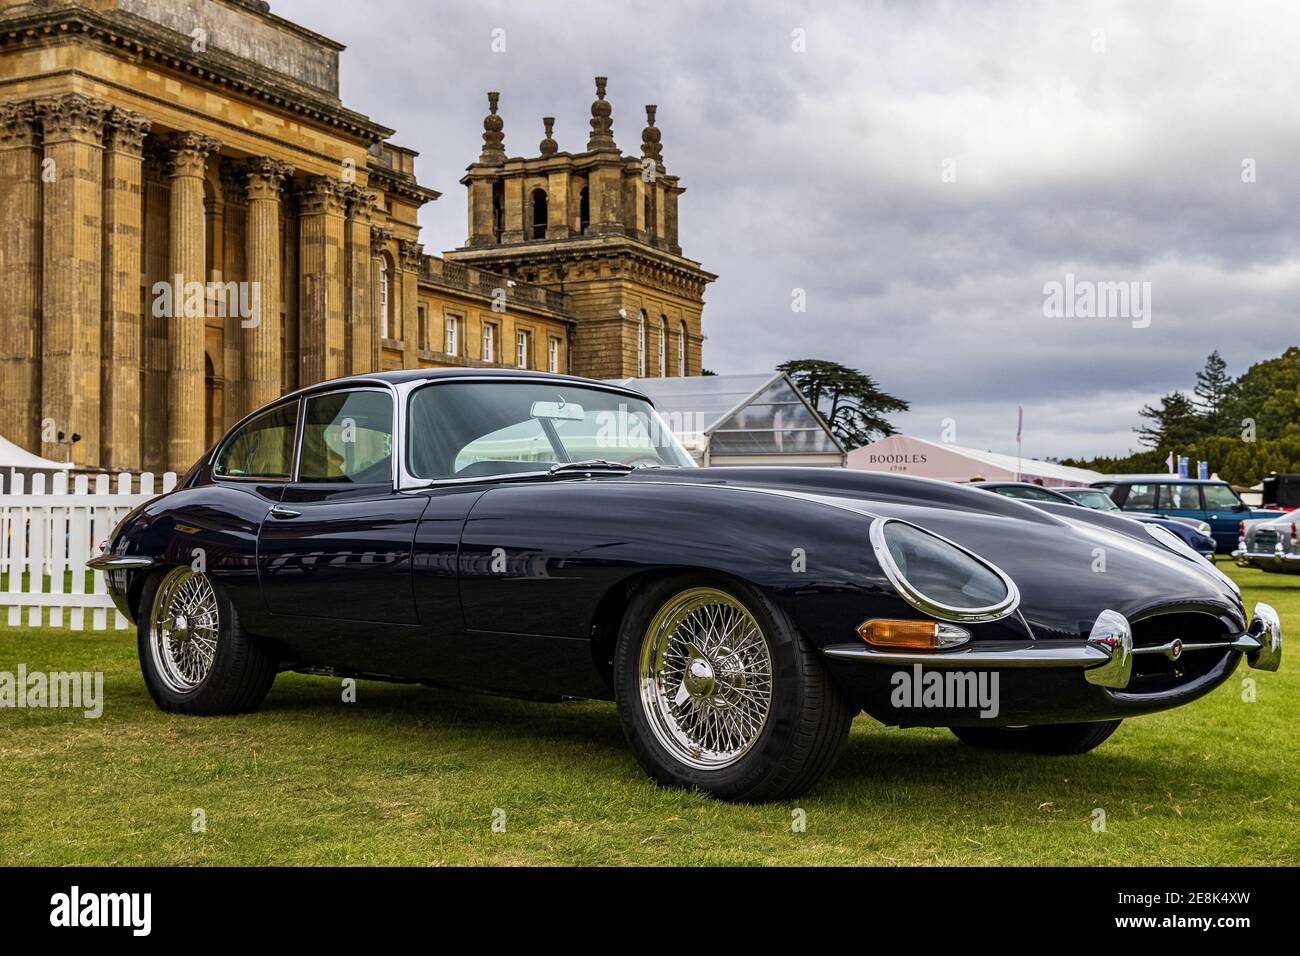 Jaguar E-Type on show at the Concours d’Elegance held at Blenheim Palace on the 26 September 2020 Stock Photo